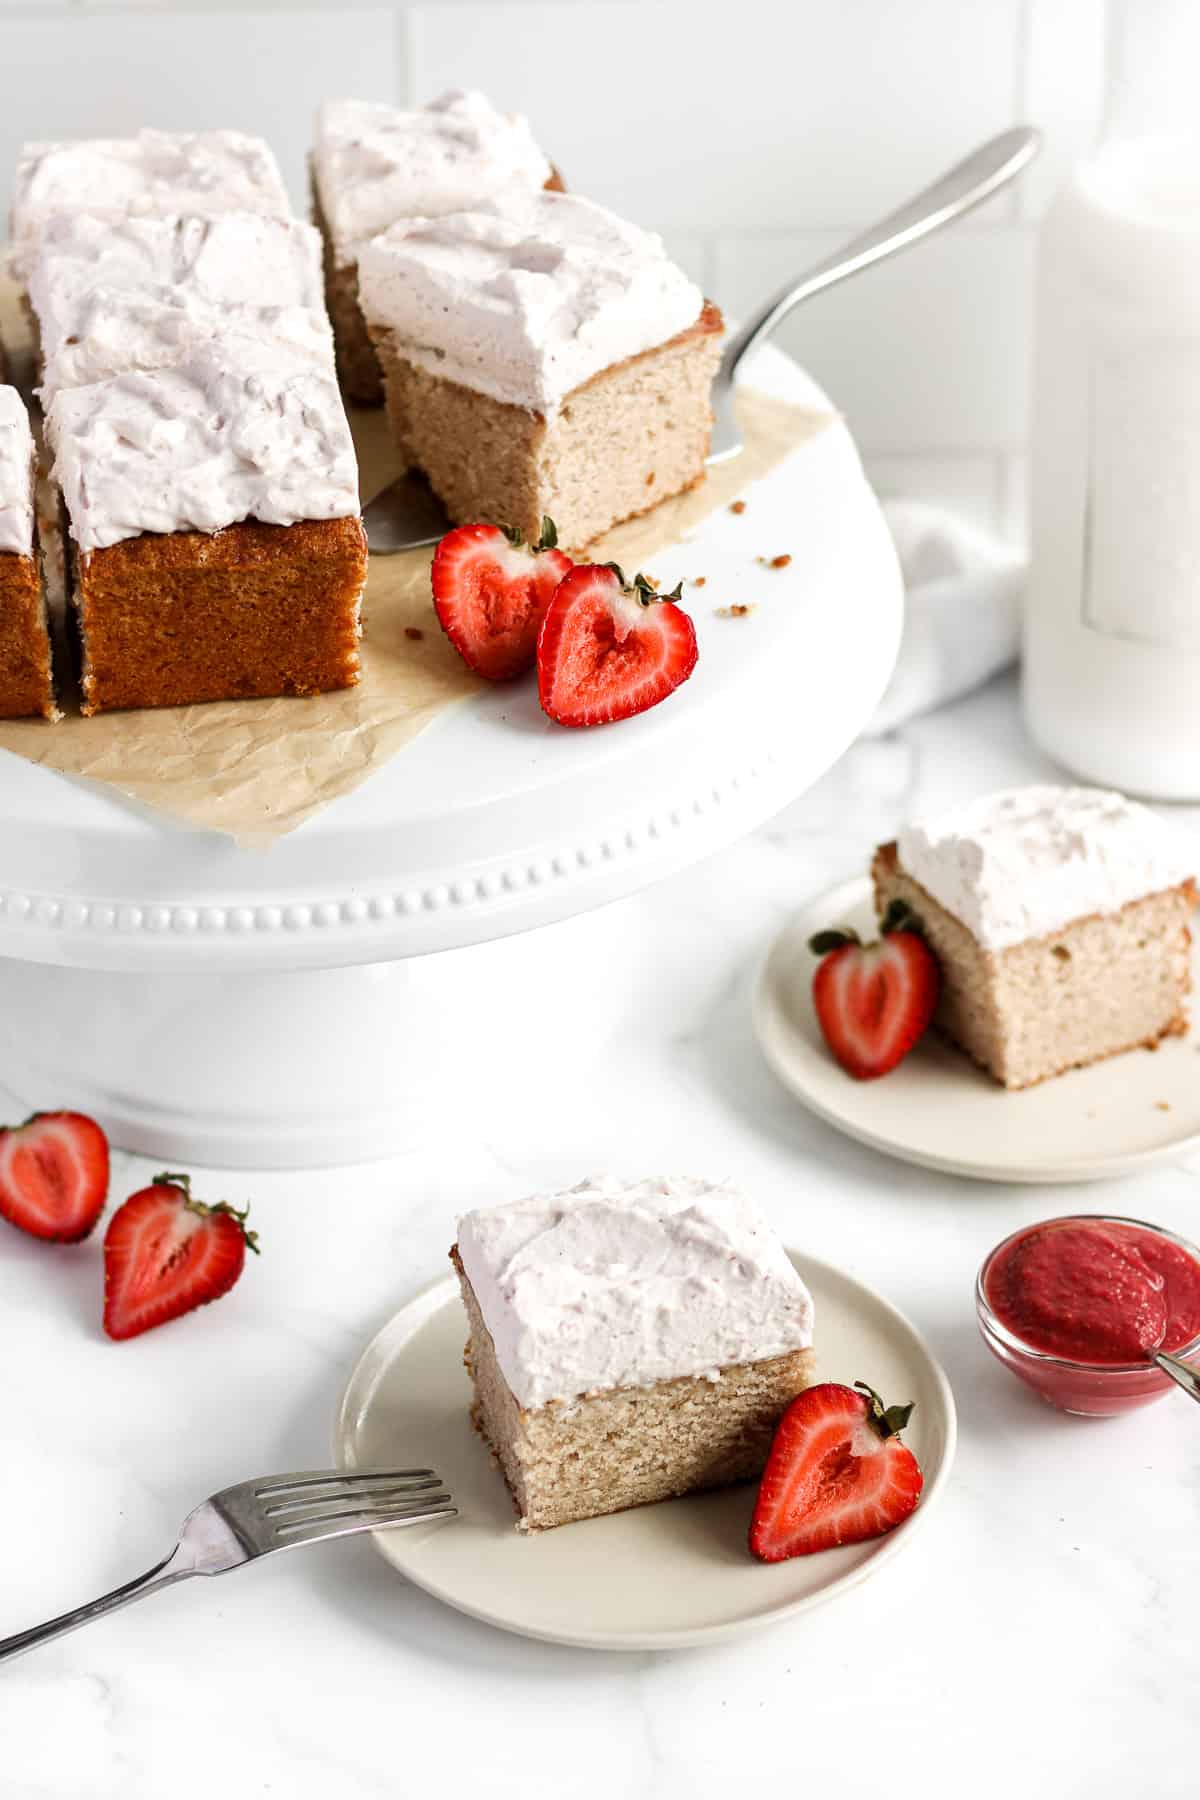 Slices of strawberry snacking cake.